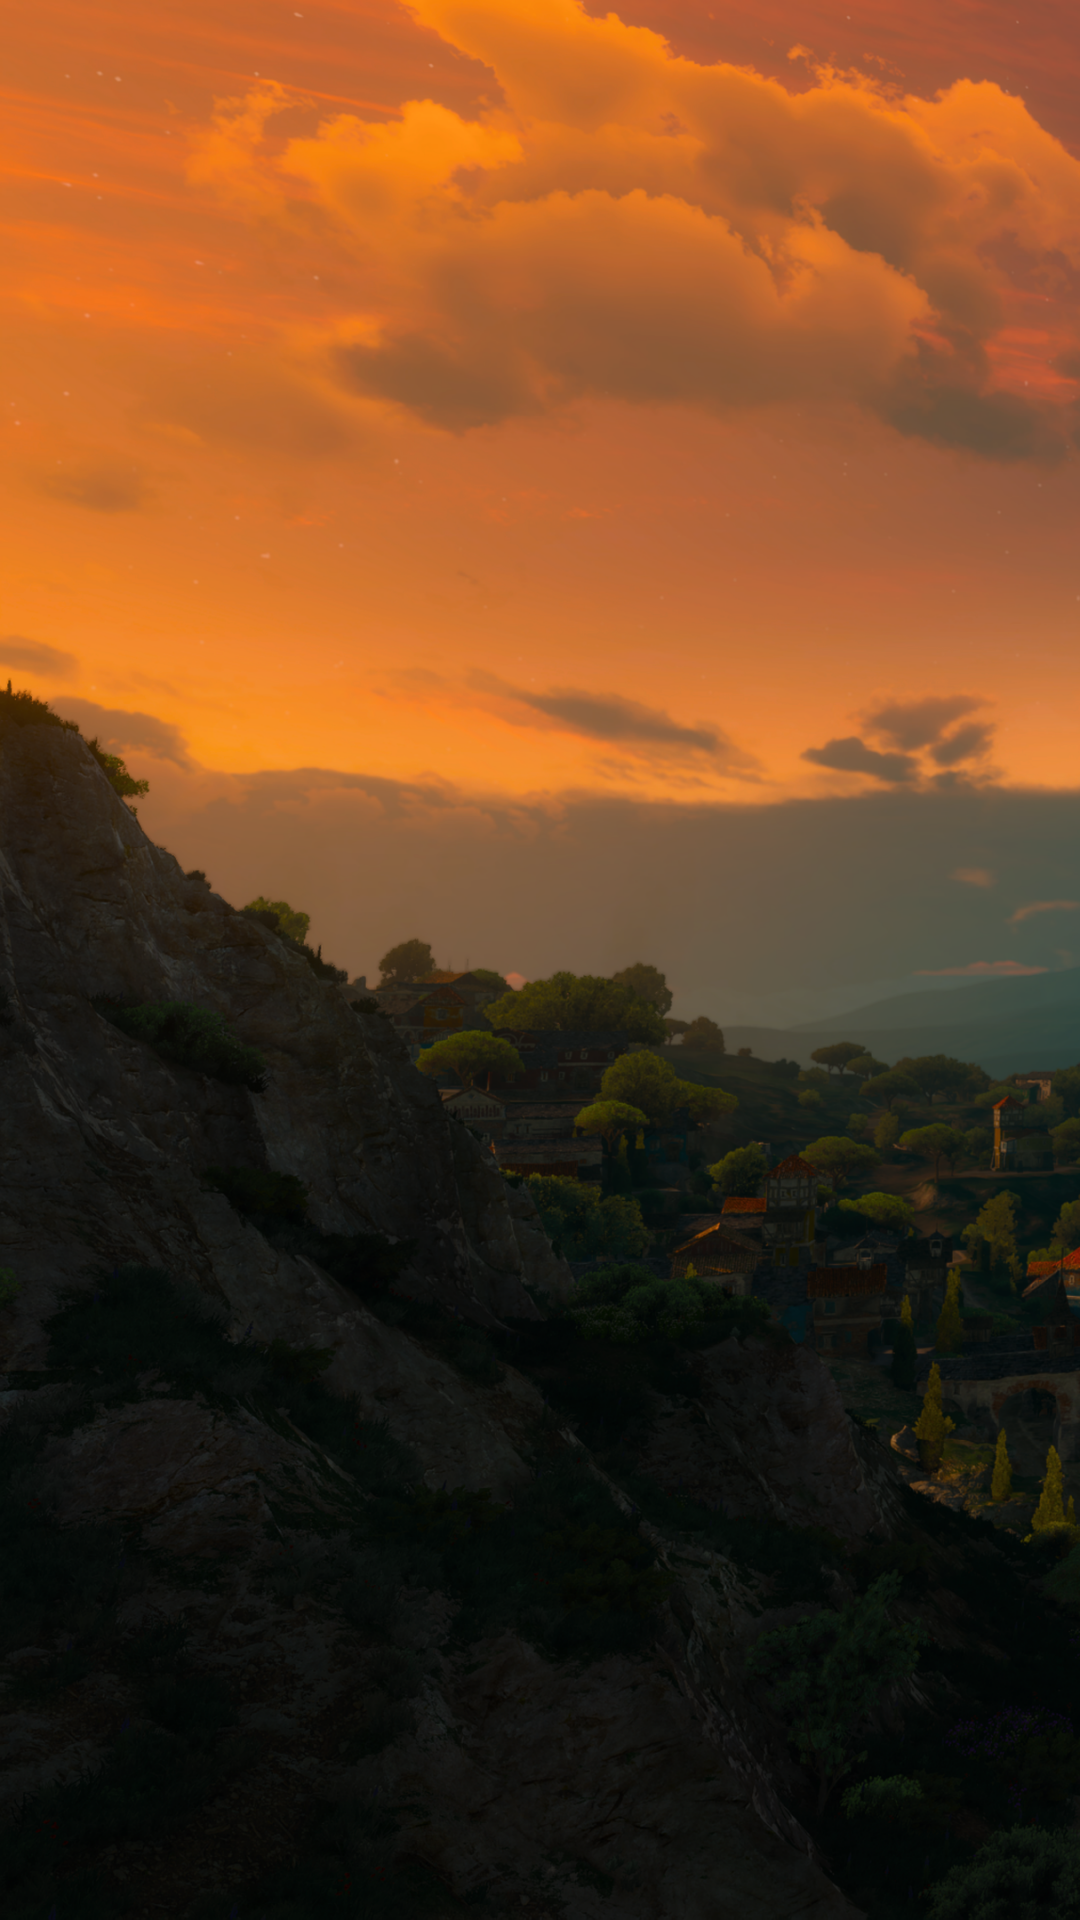 The Witcher 3 - End of a Long Day